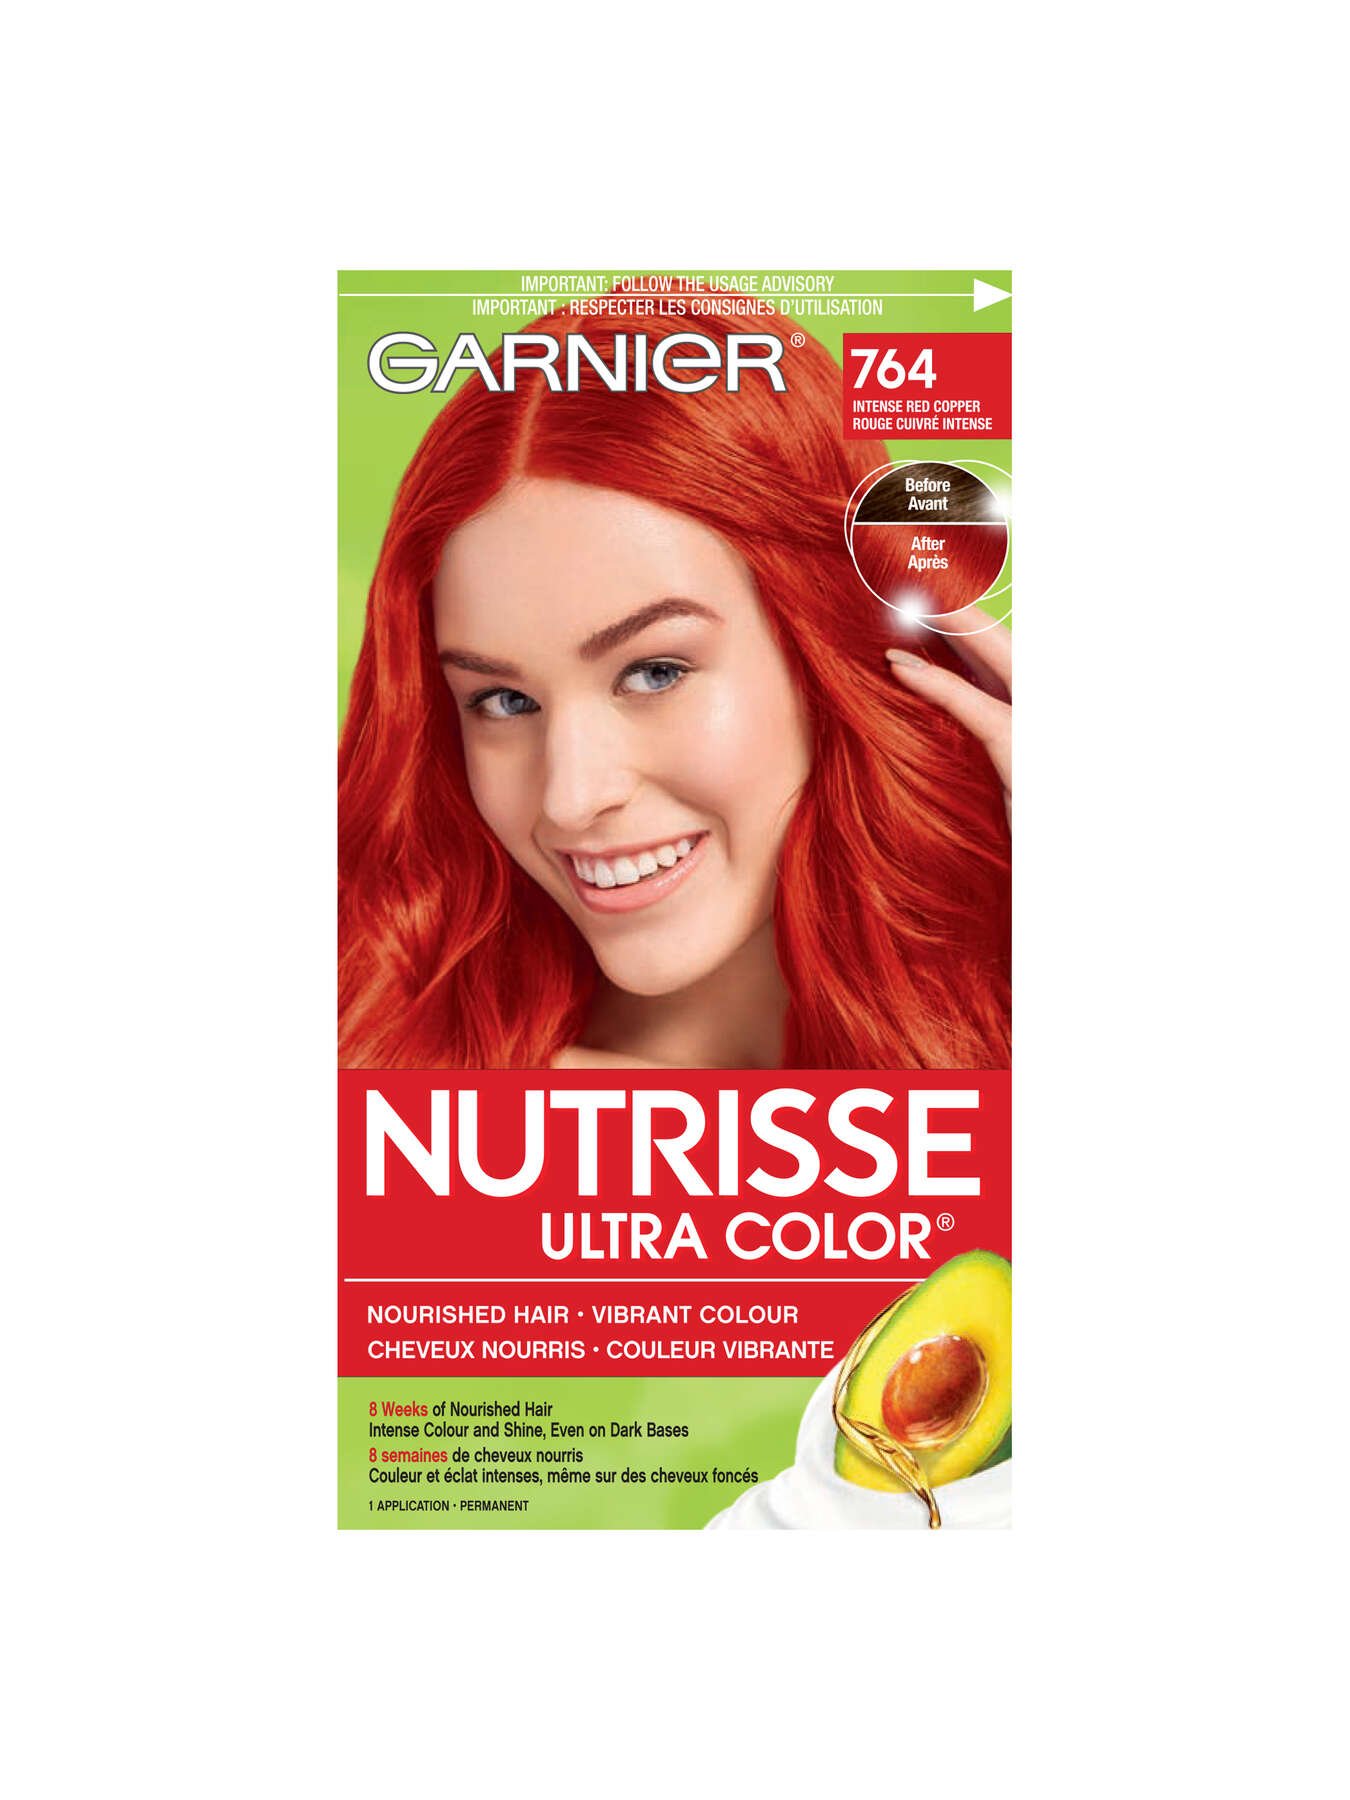 https://www.garnier.ca/-/media/project/loreal/brand-sites/garnier/usa/ca/new_products/hair_colour/nutrisse_ultra_color/garnier-hair-dye-nutrisse-ultra-color-764-intense-red-copper-603084496198-t1.jpg